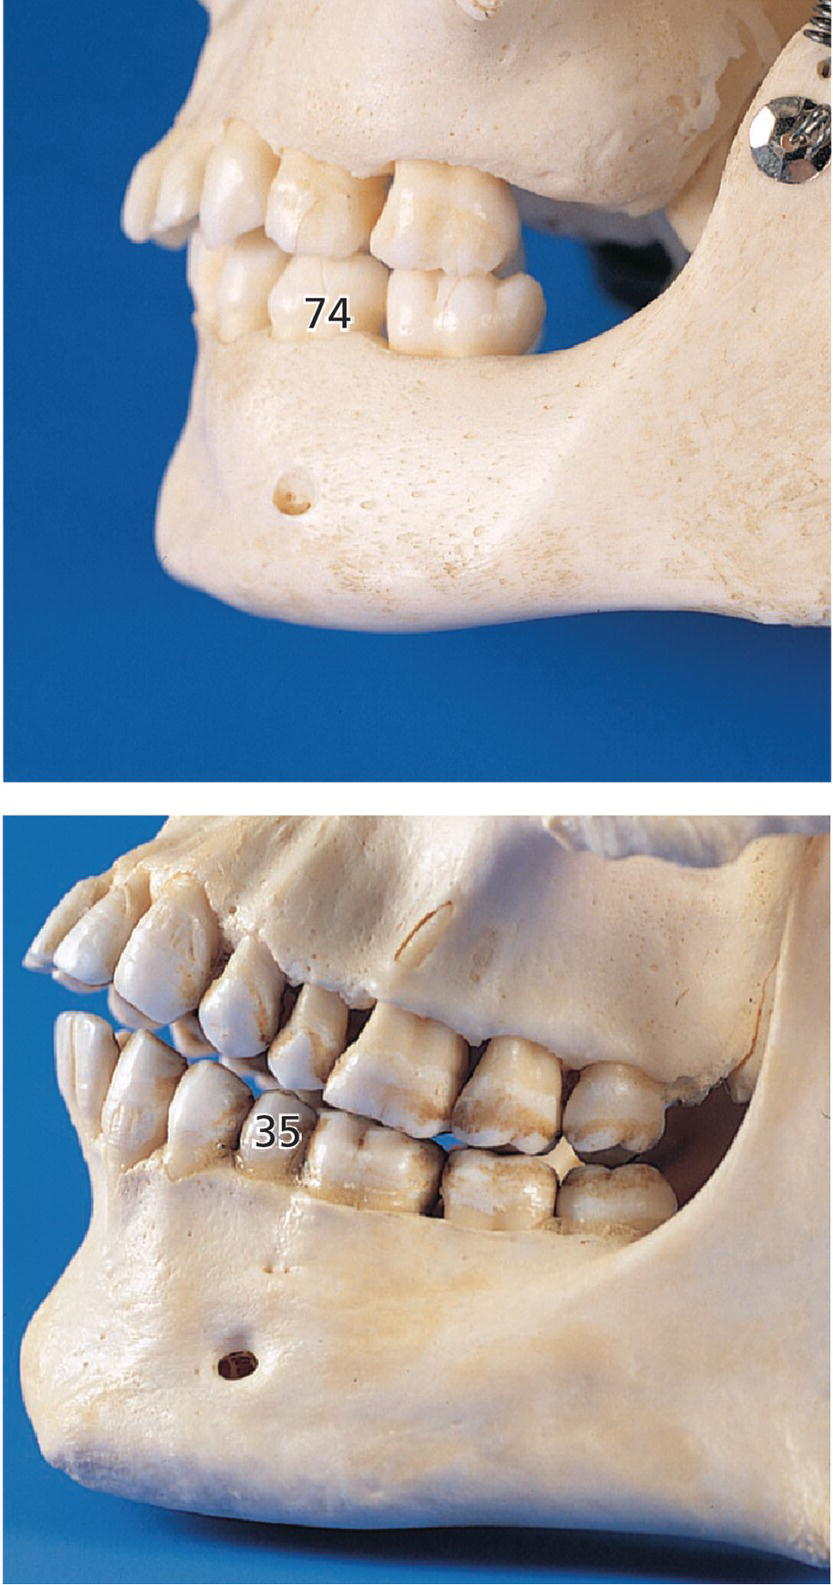 Two photos of skulls displaying mental foramen located closer to the primary mandibular first molar (top) and the permanent second premolar (bottom).